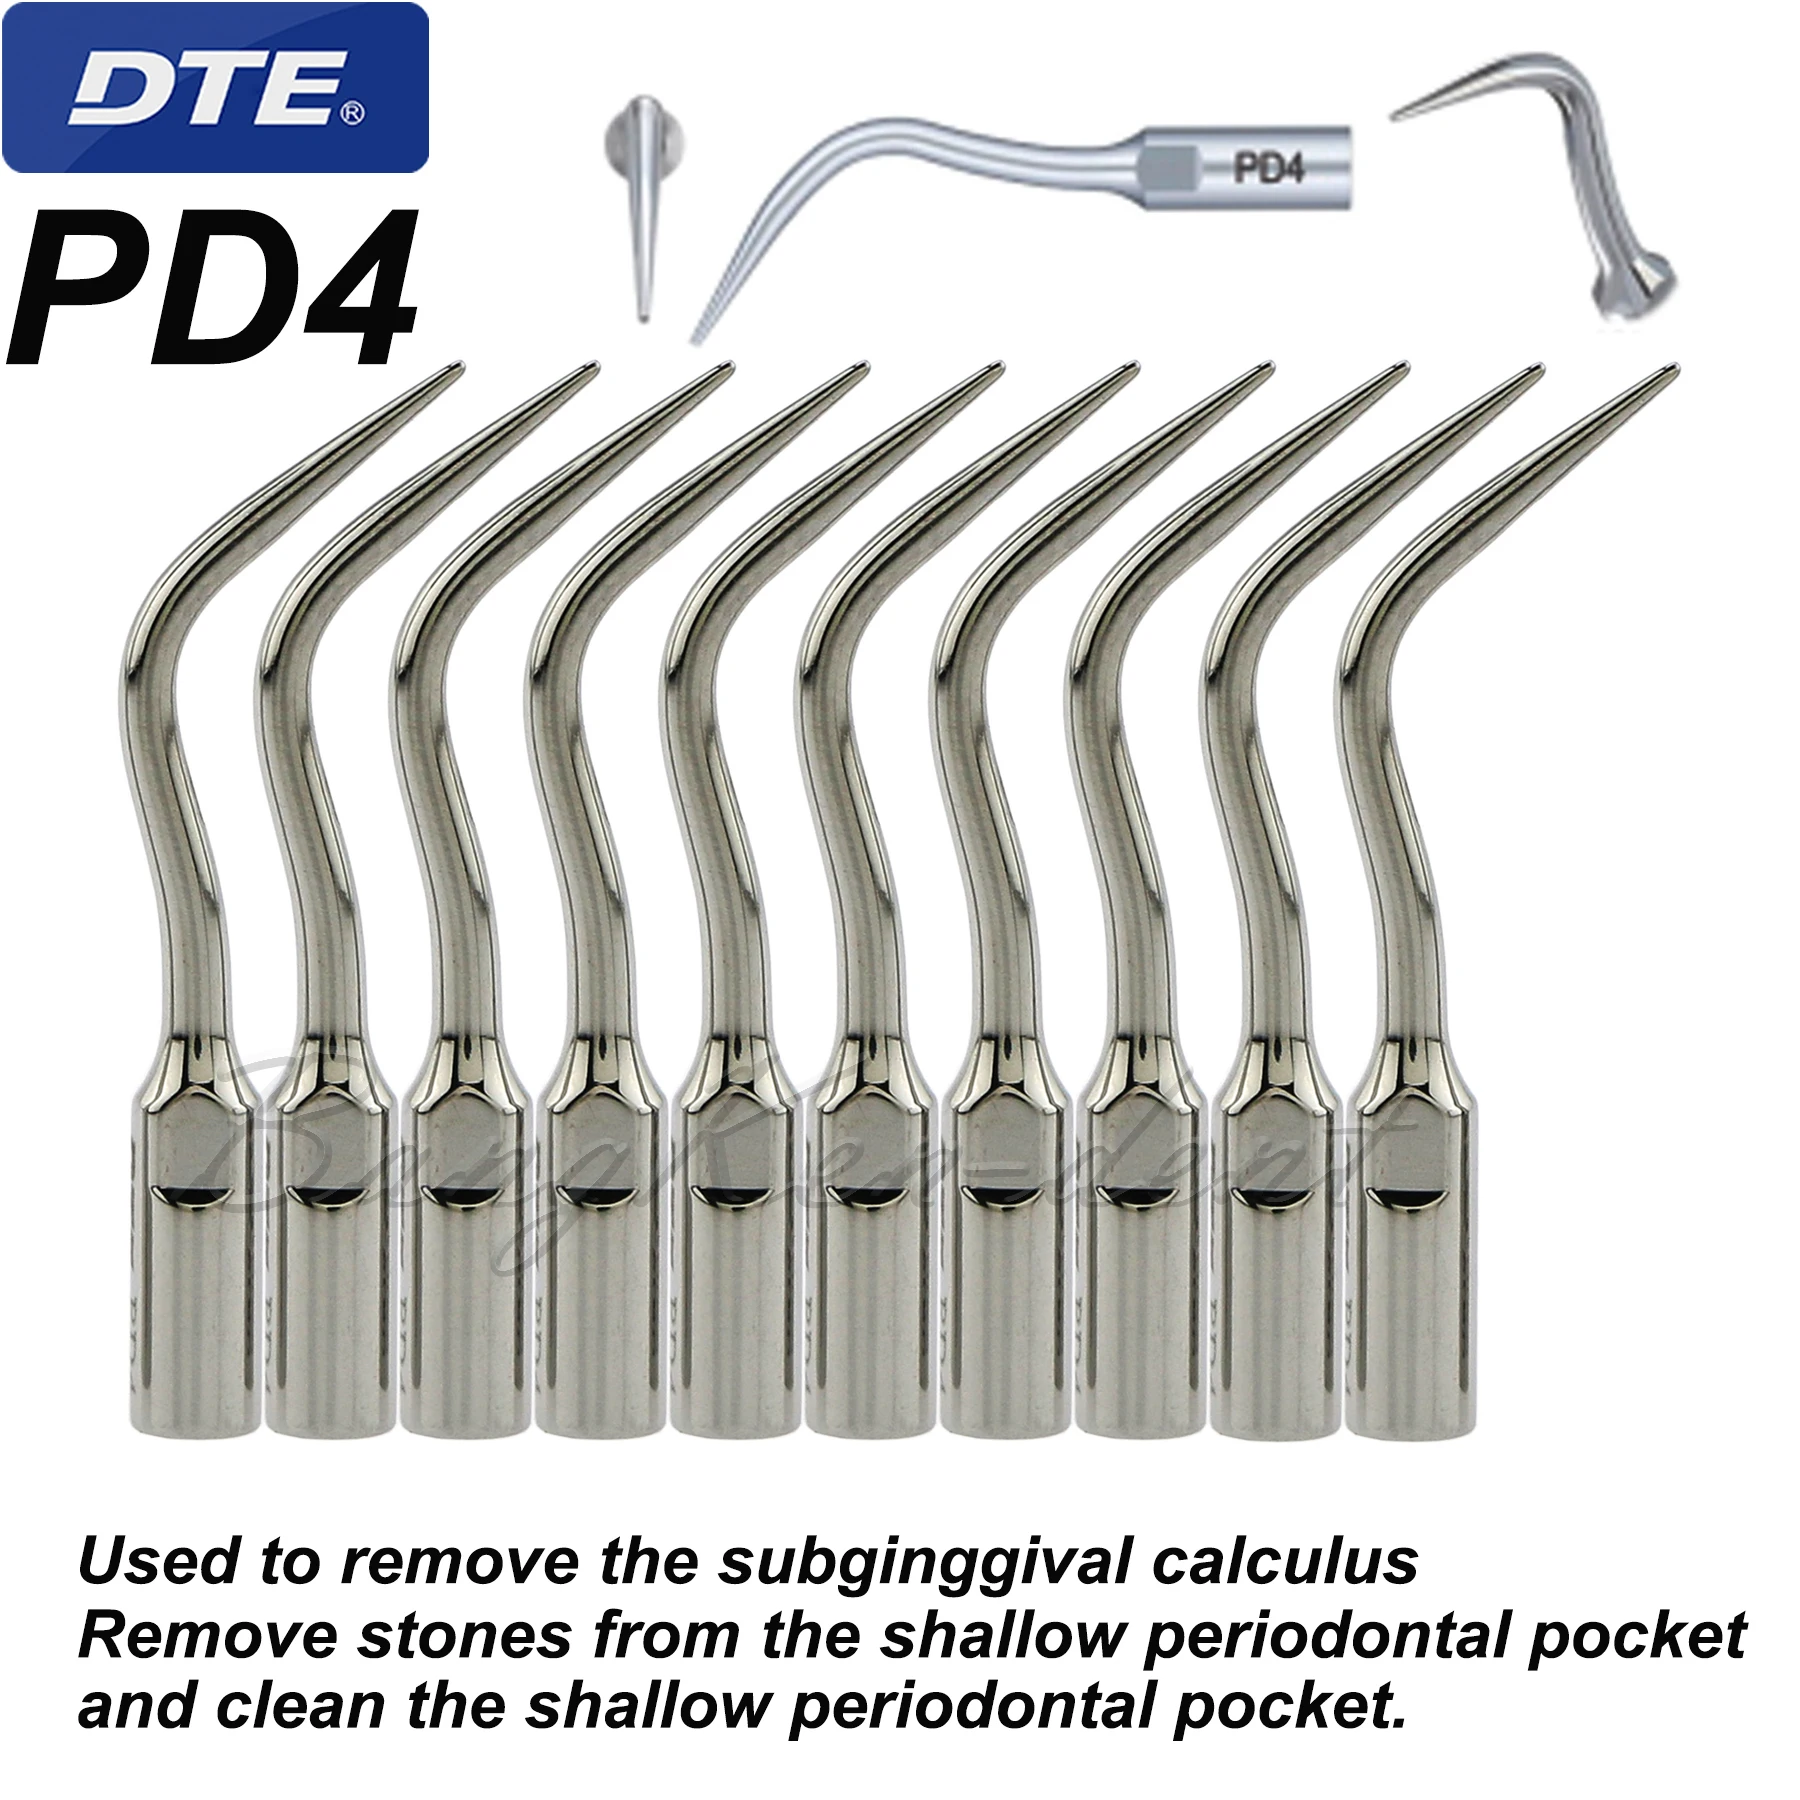 Woodpecker DTE Dental Ultrasonic Scaler Tips Compatible NSK SATELEC Remove Stones Clean Shallow Periodontal Pocket PD4-10pcs